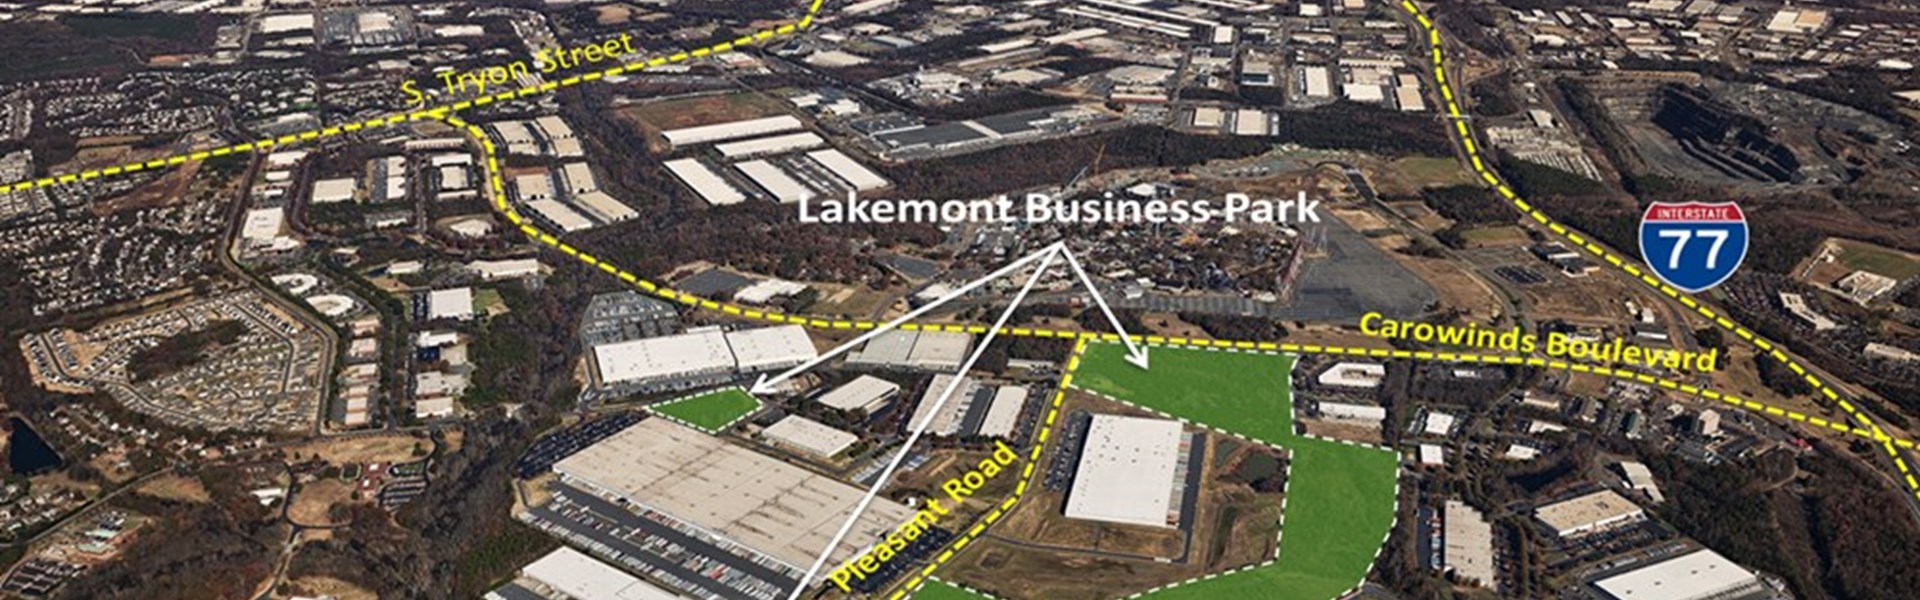 Stanley Black And Decker to Open New Manufacturing Facility In Crescent's Lakemont Business Park